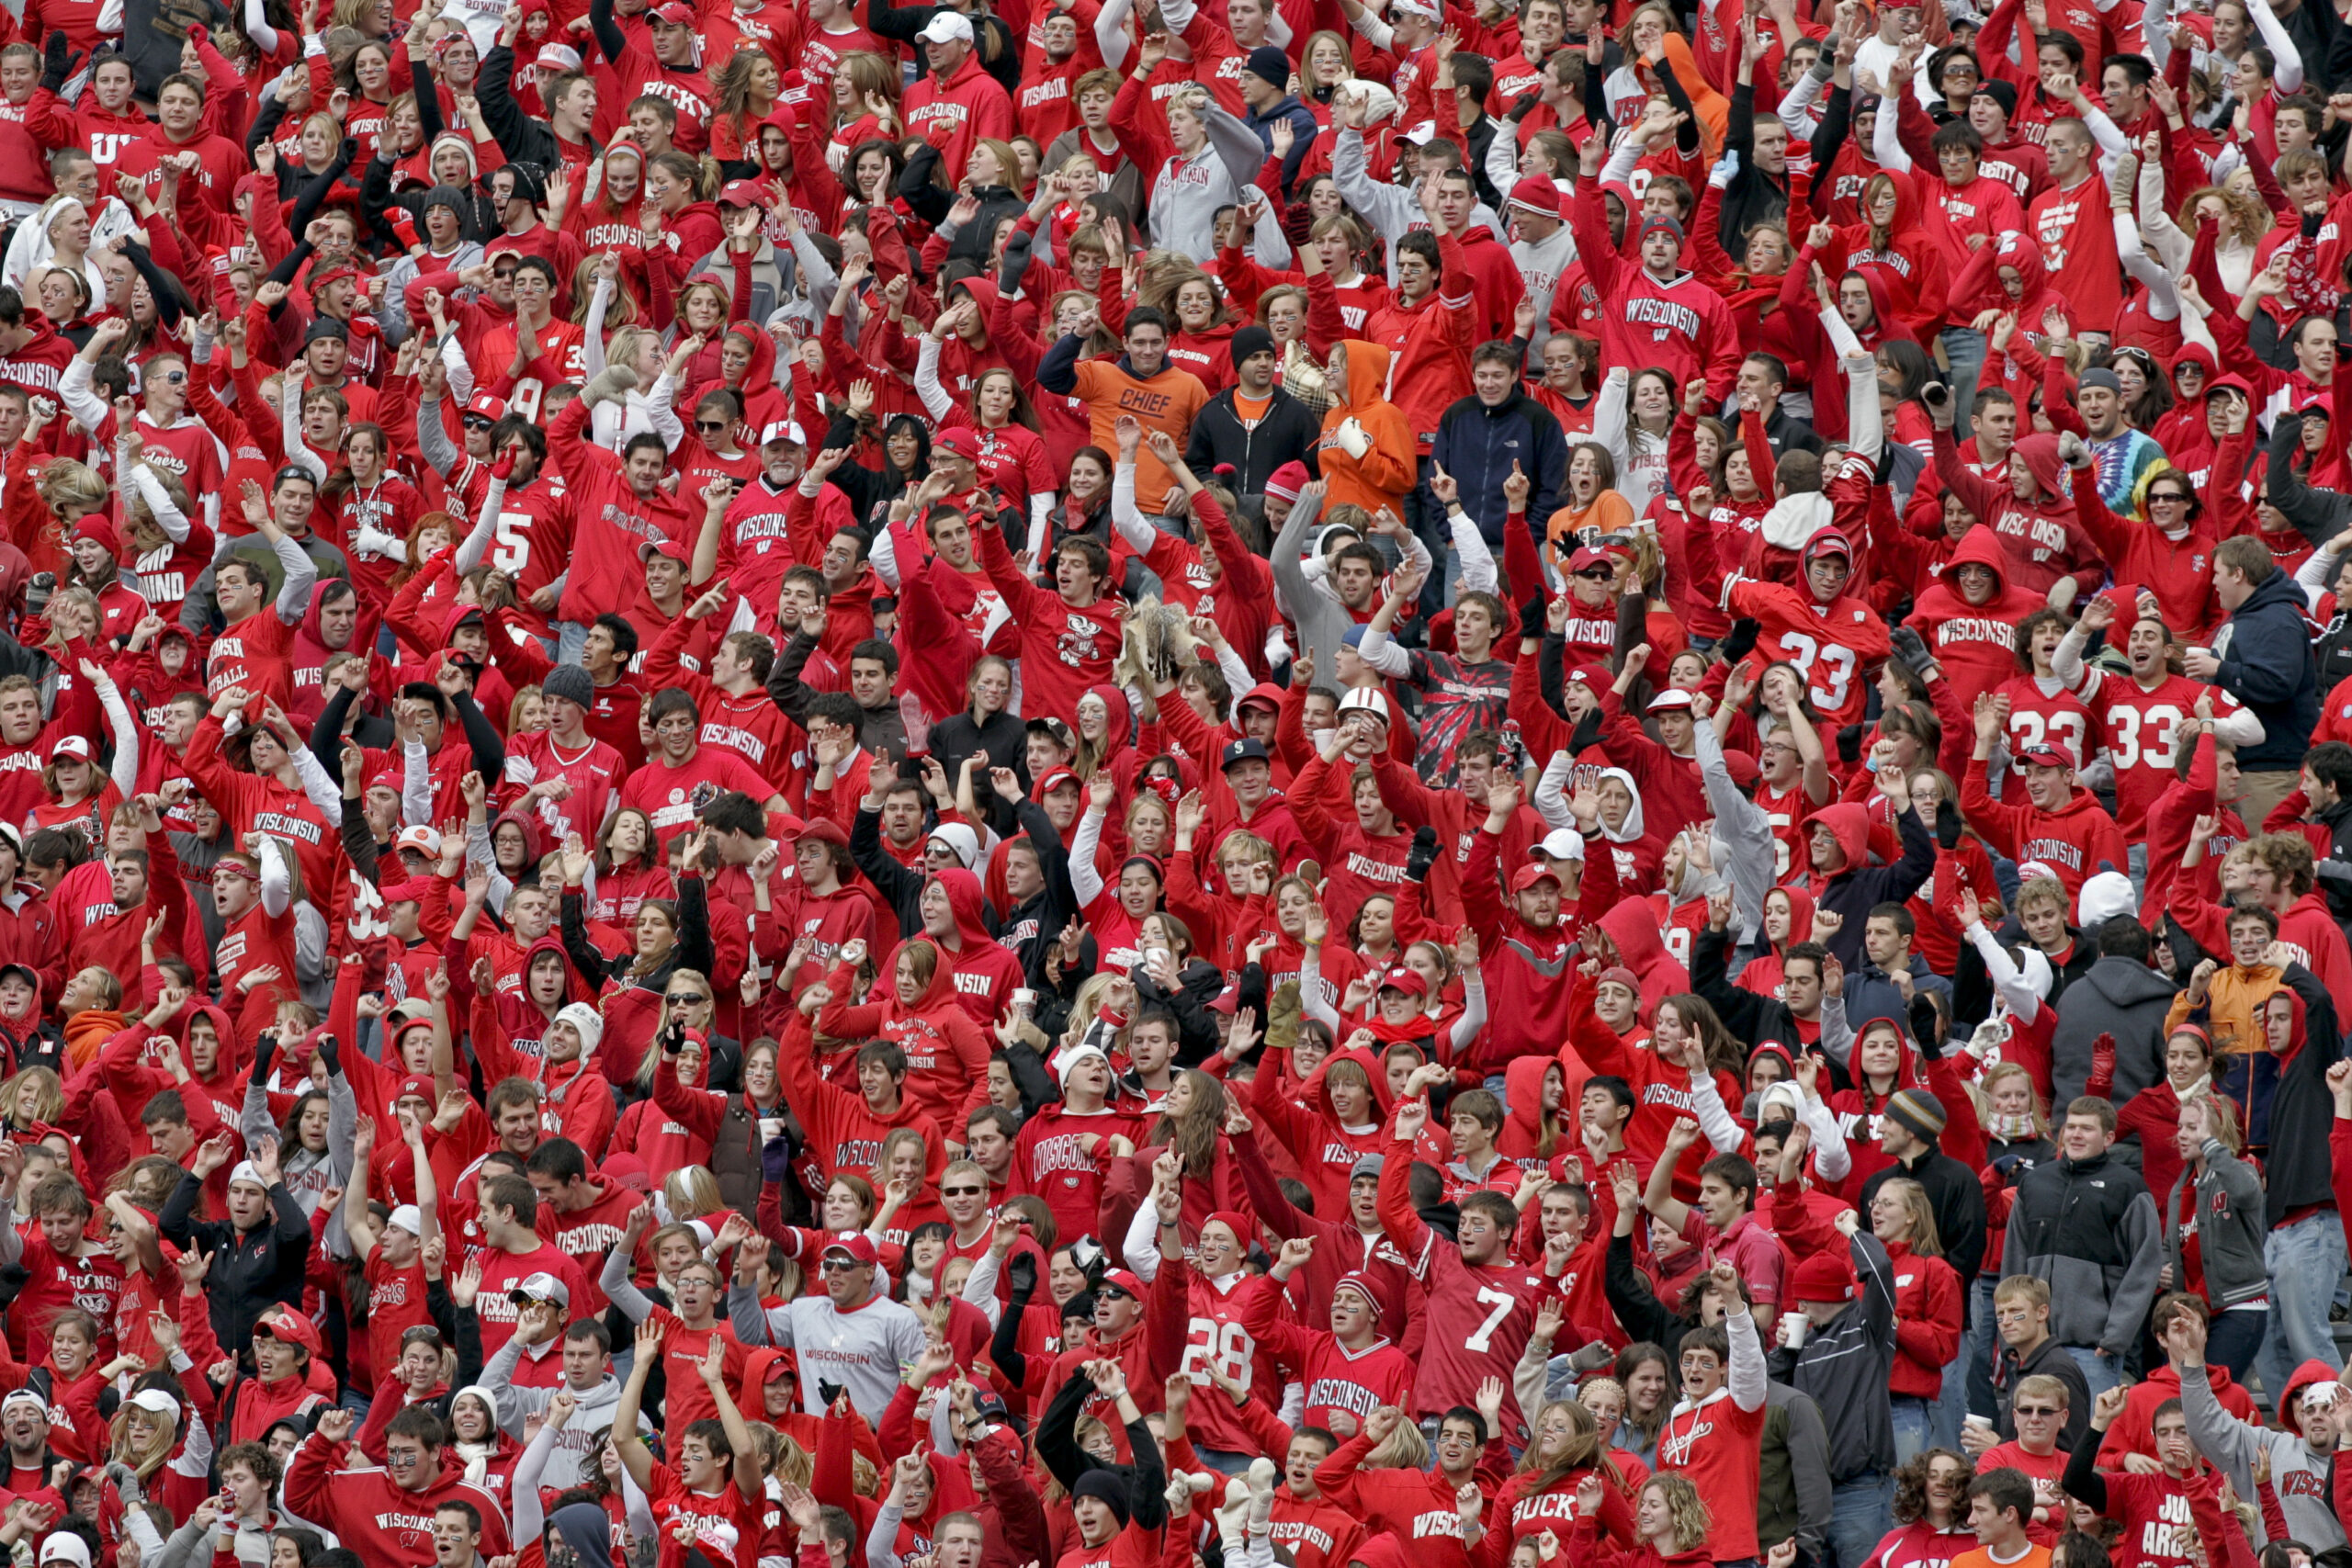 Fans during "Jump Around" at a Wisconsin Badgers football game.